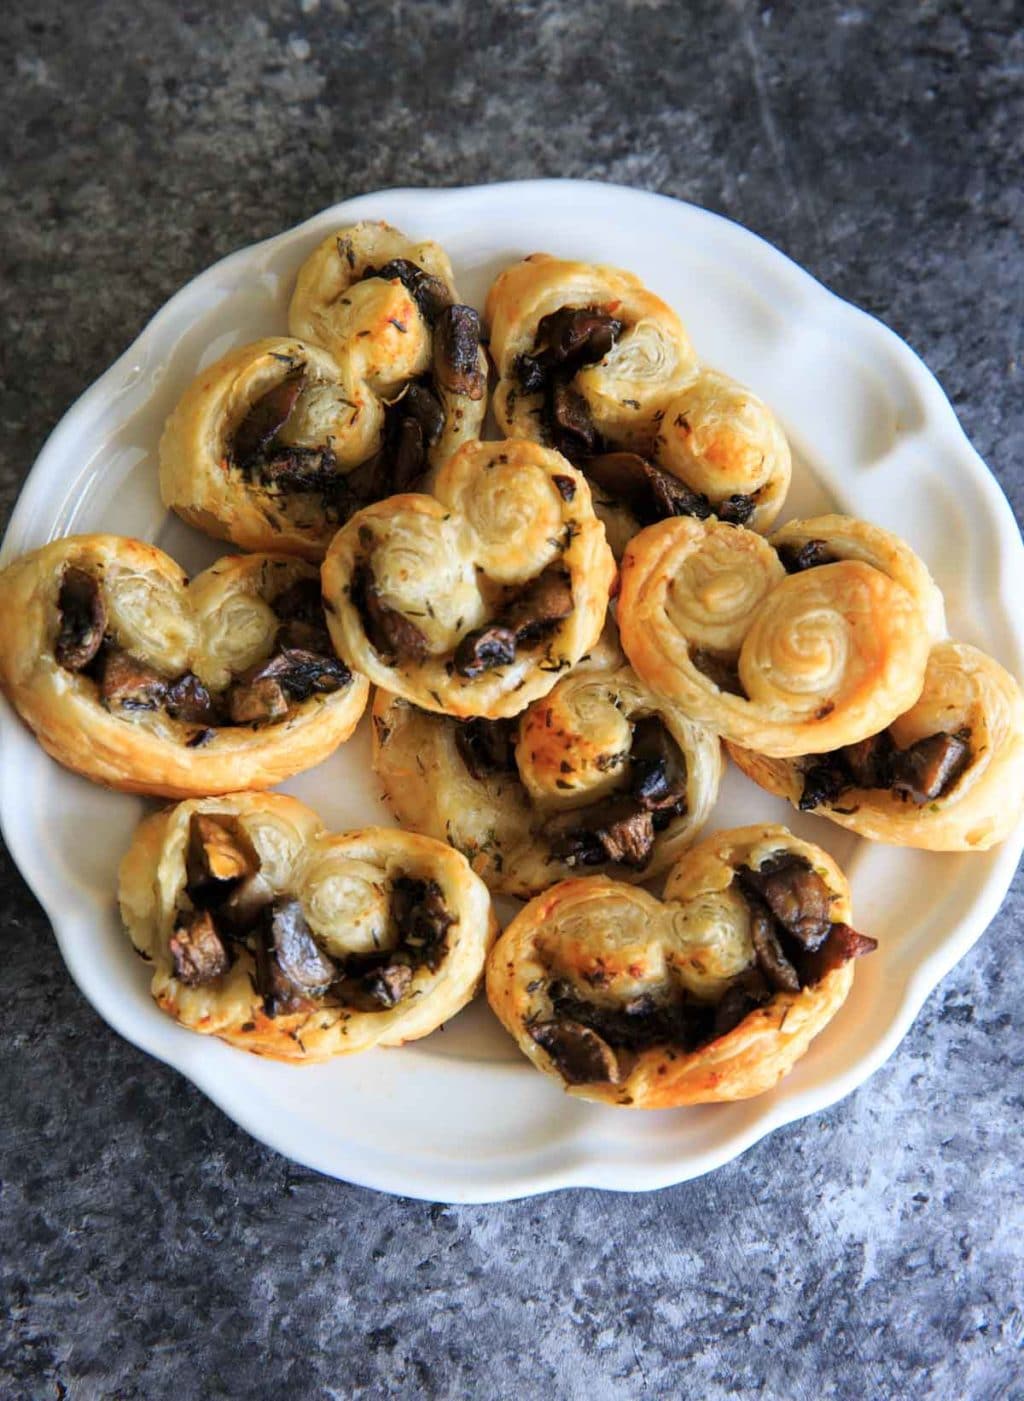 Savory Mushroom Palmiers - a savory version of the puff pastry treat that can be served as a delicious appetizer or side. Especially great for holidays or dinner parties!